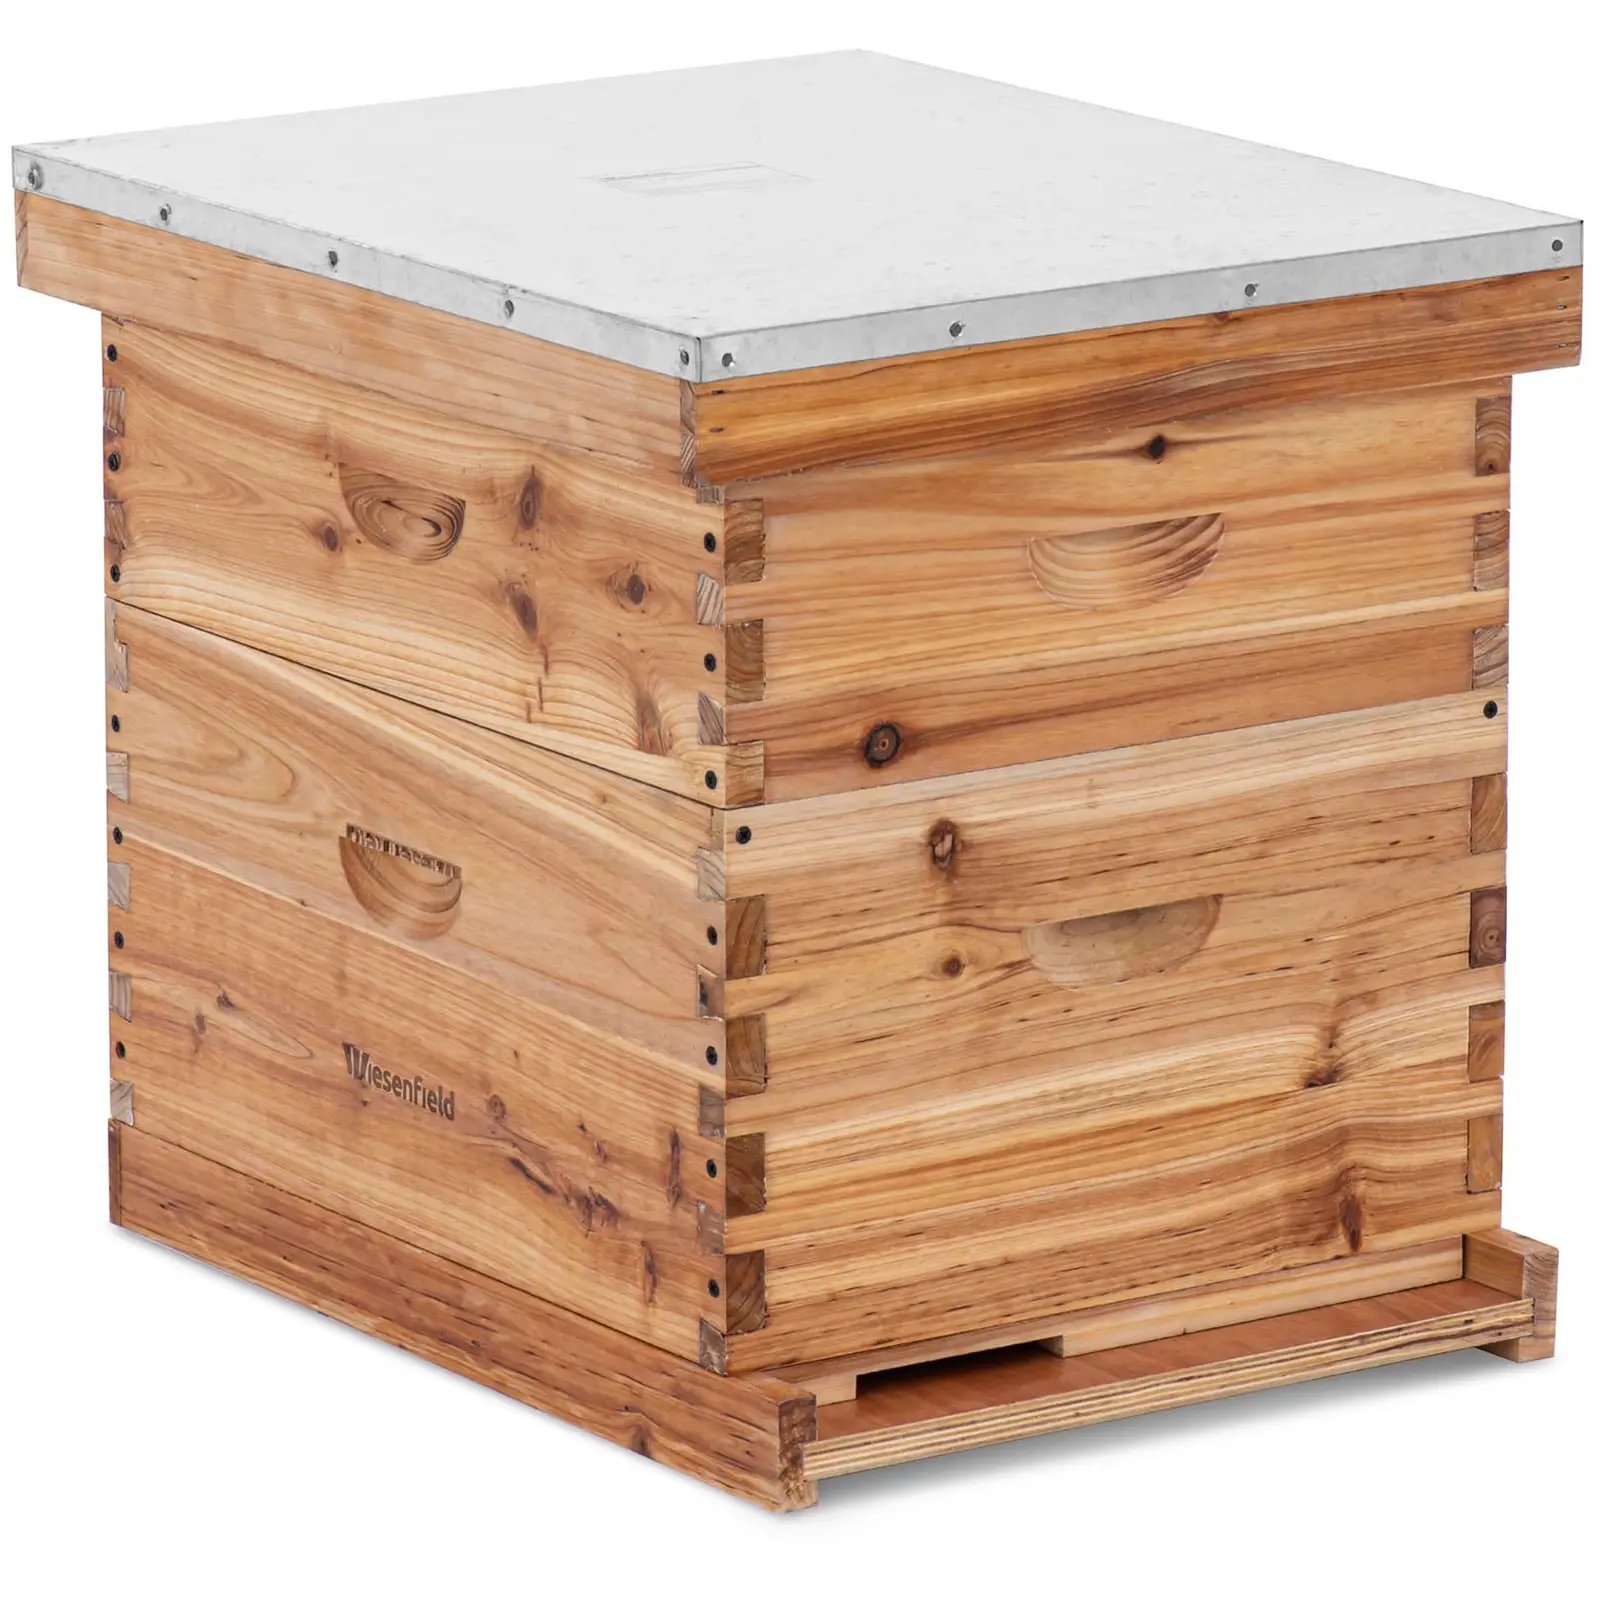 Langenstroth beehive–2 frames and base cassette with entrance hole